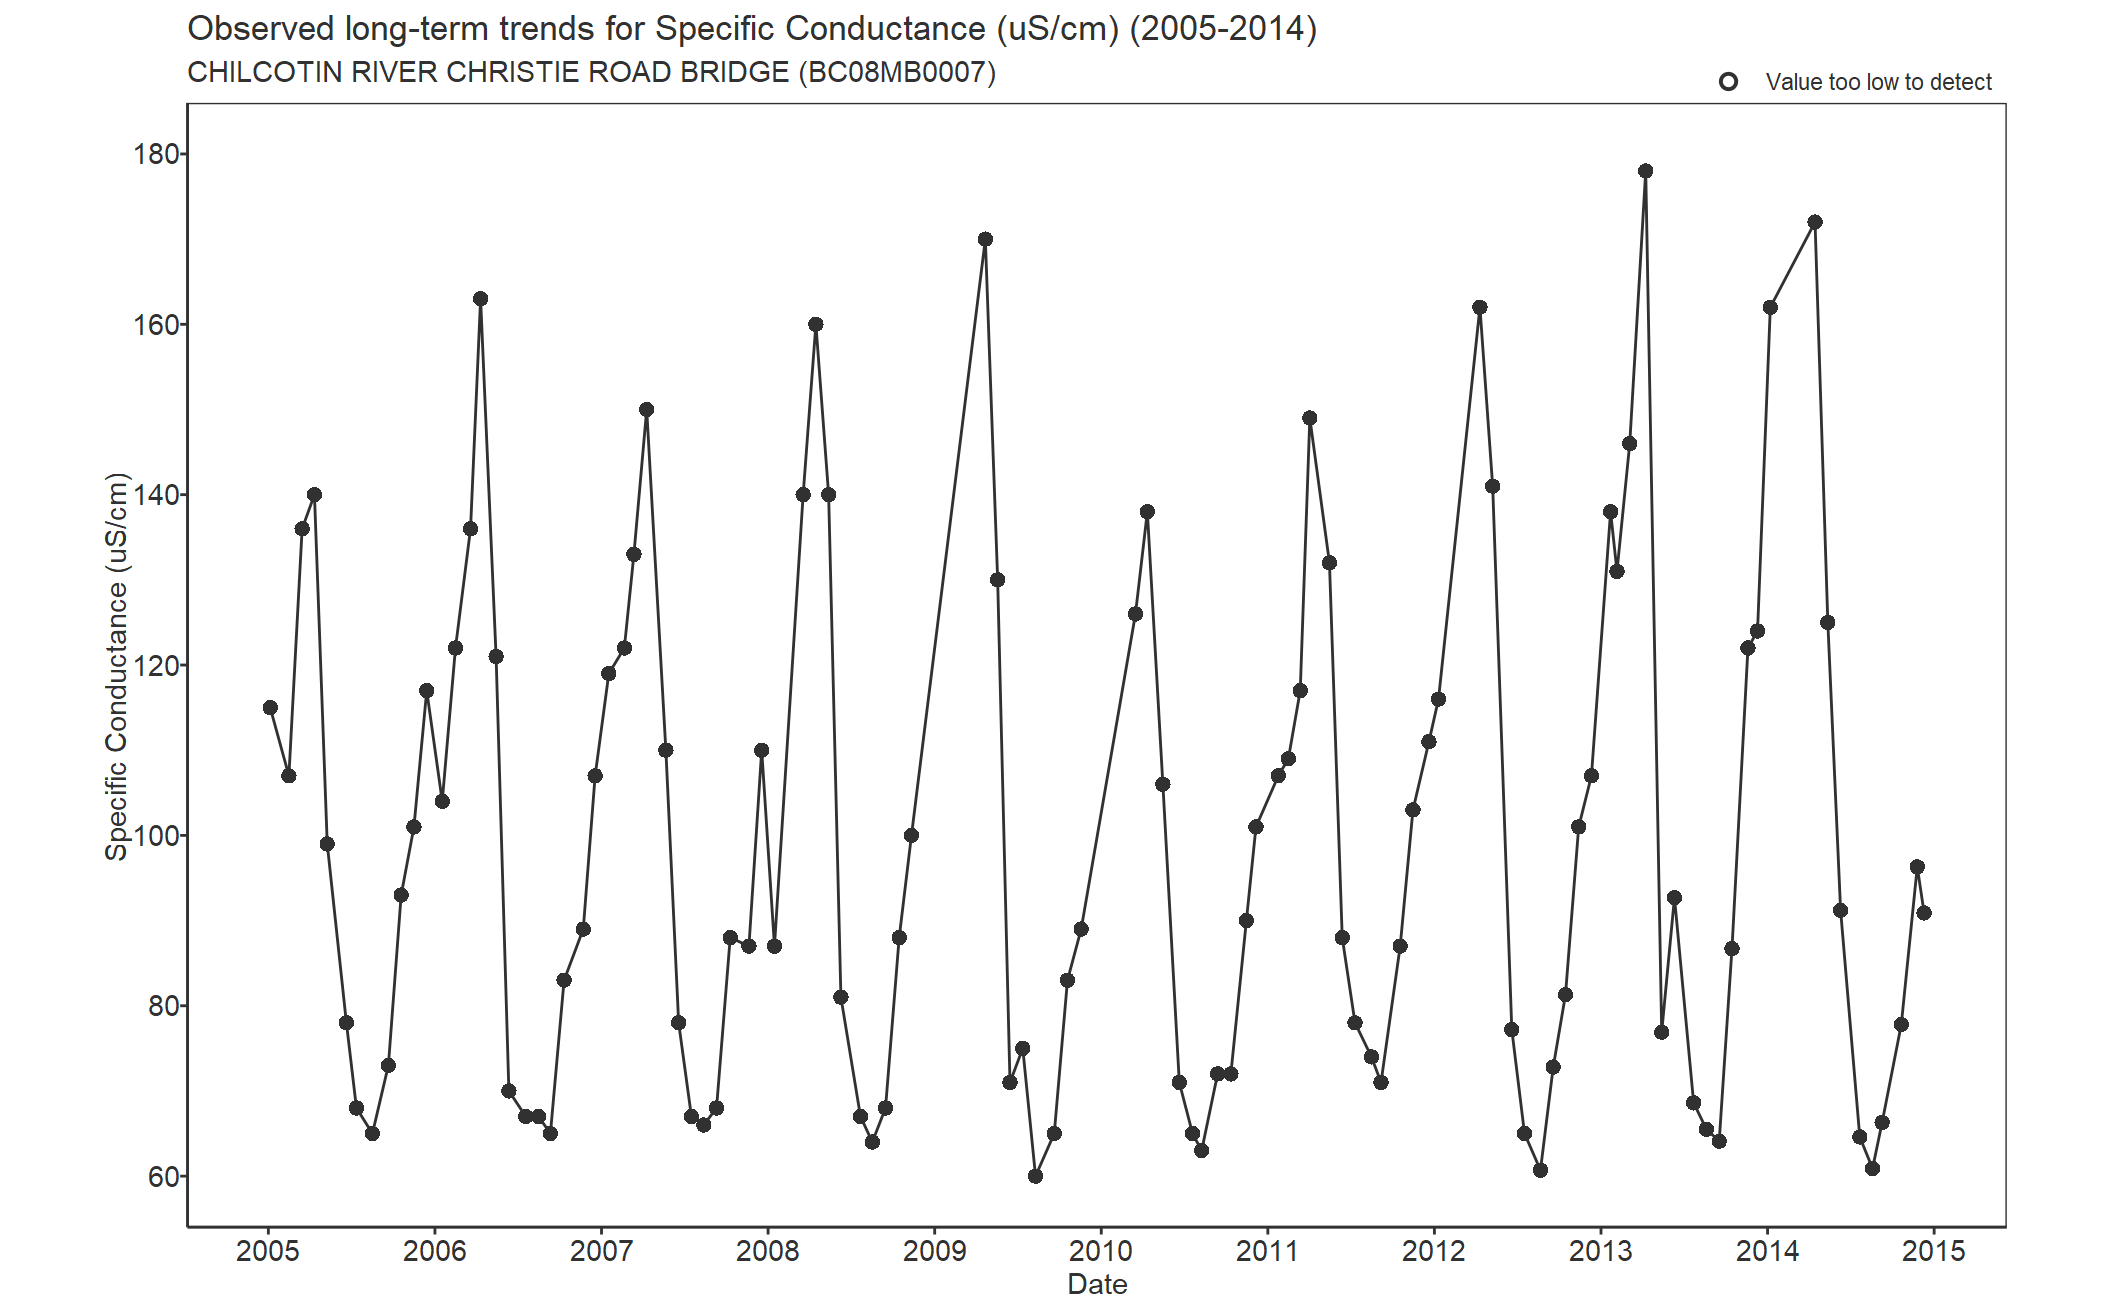 Observed long-term trends for Specific Conductivity (2005-2014)